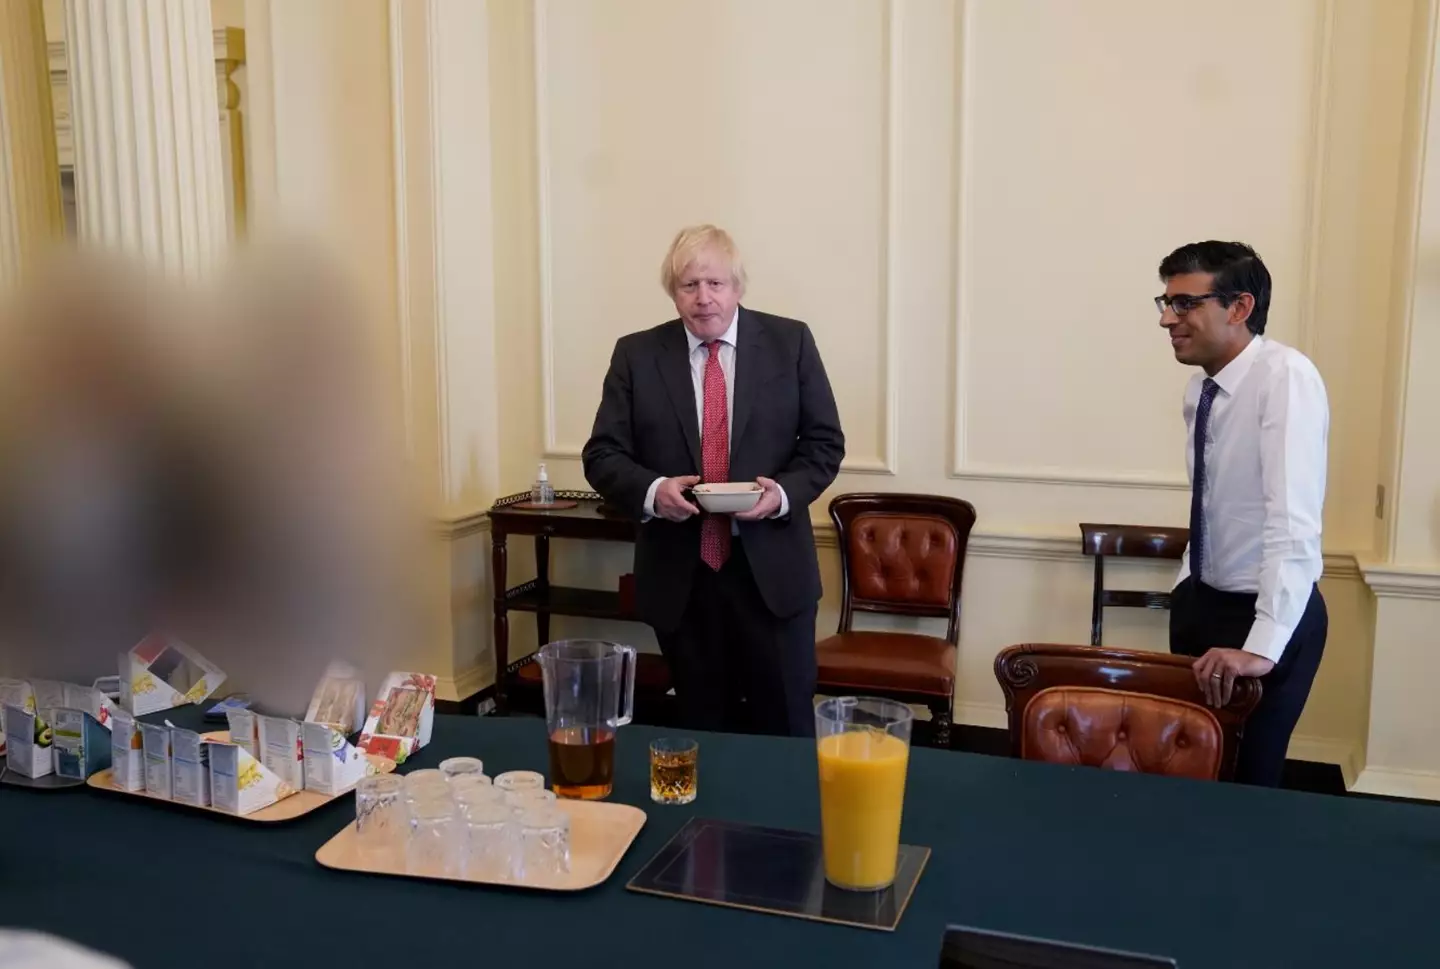 People couldn't believe the spread - or lack thereof - for Boris Johnson's birthday party. (